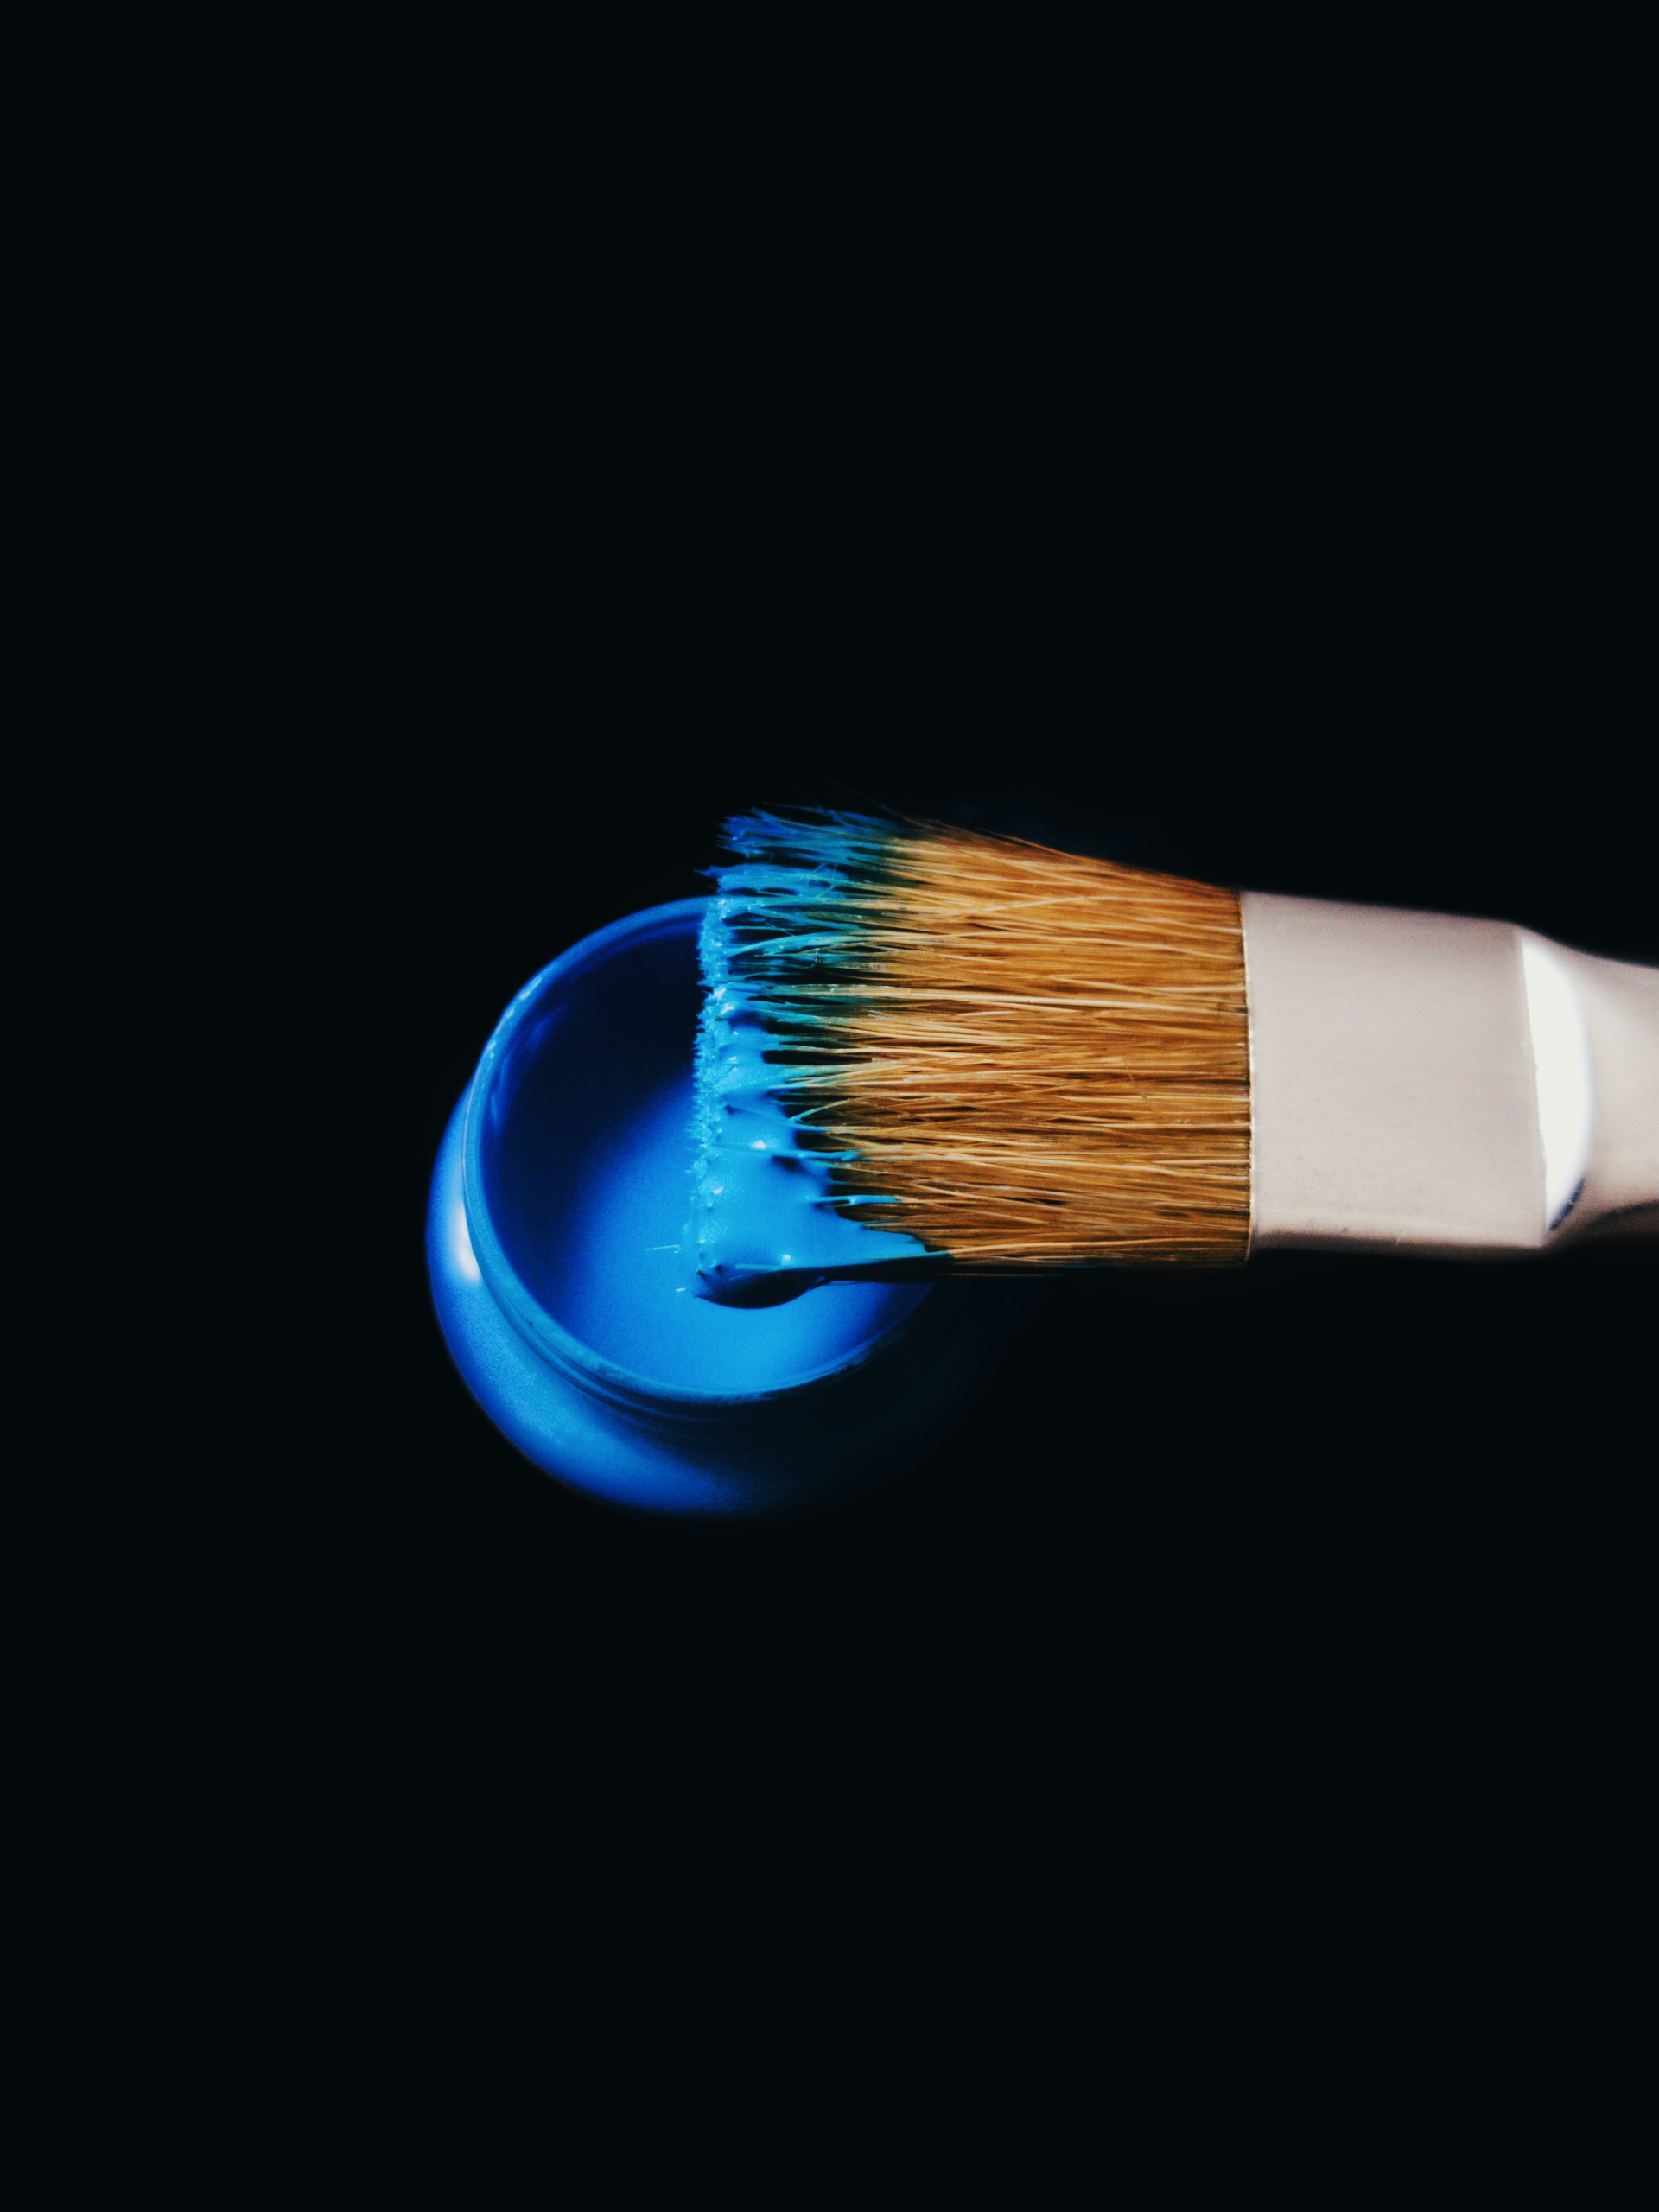 Paint Brush with a can